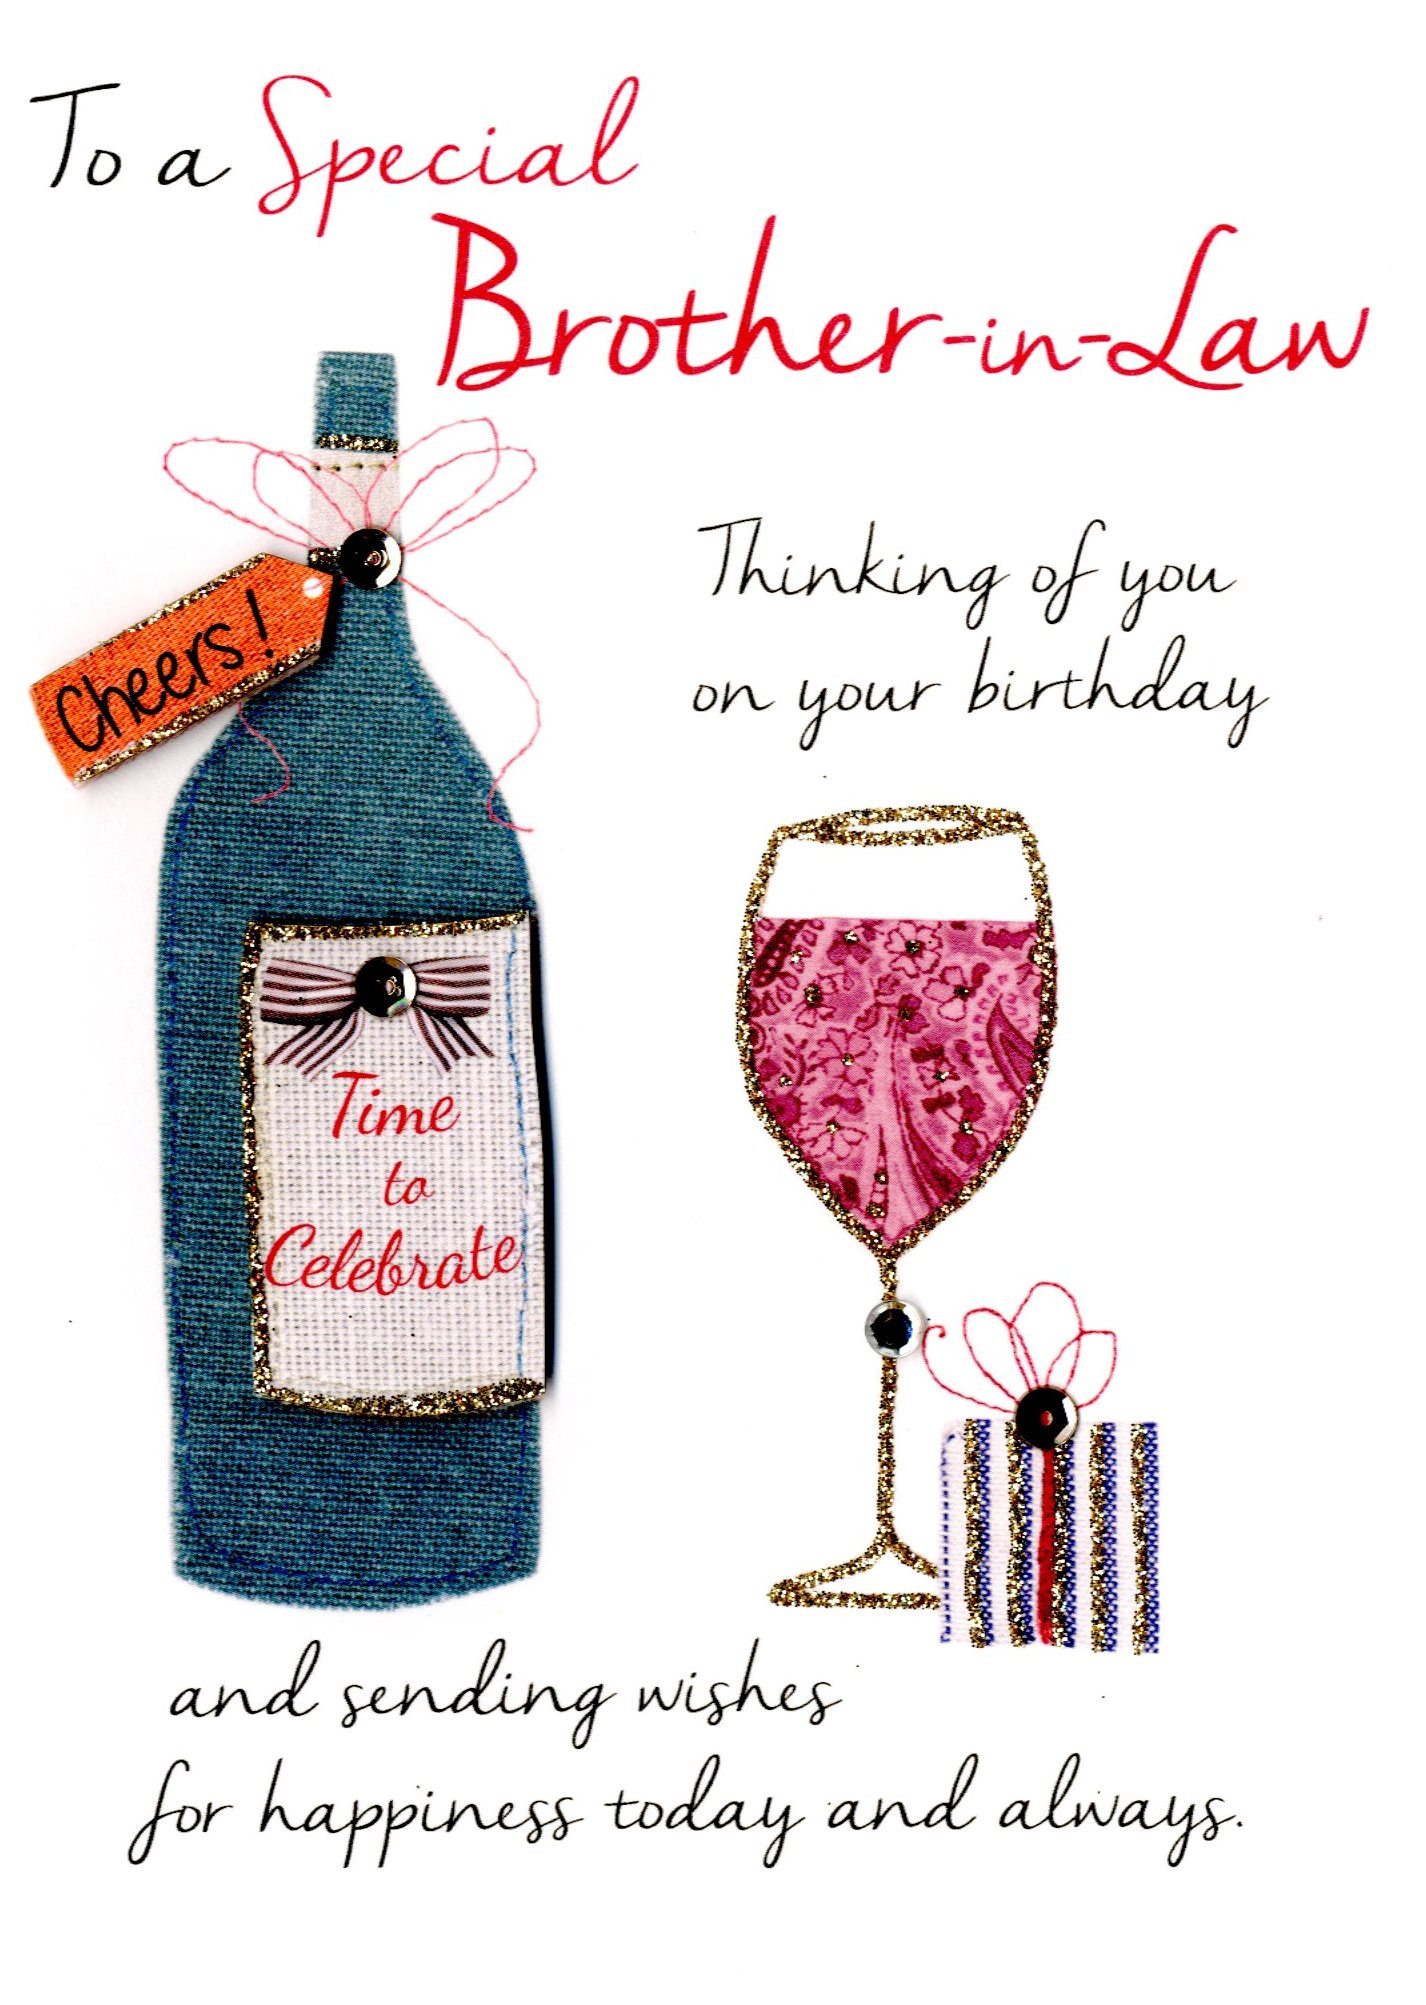 Brother In Law Birthday Cards
 Special Brother In Law Birthday Greeting Card Second